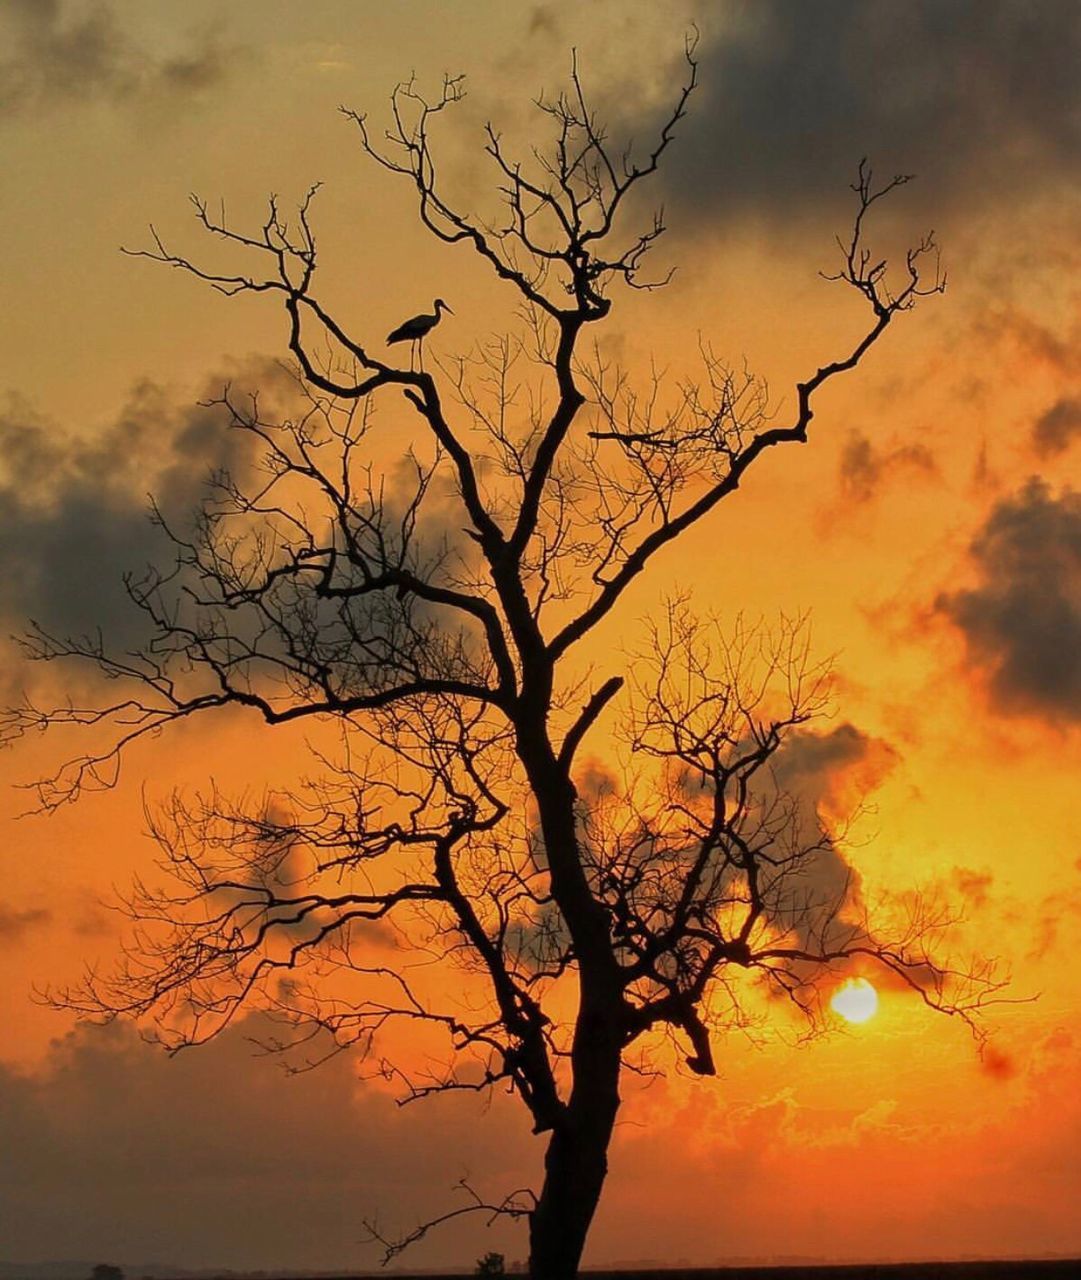 bare tree, tree, silhouette, branch, nature, sky, beauty in nature, outdoors, sunset, no people, tranquility, bird, scenics, landscape, dead tree, day